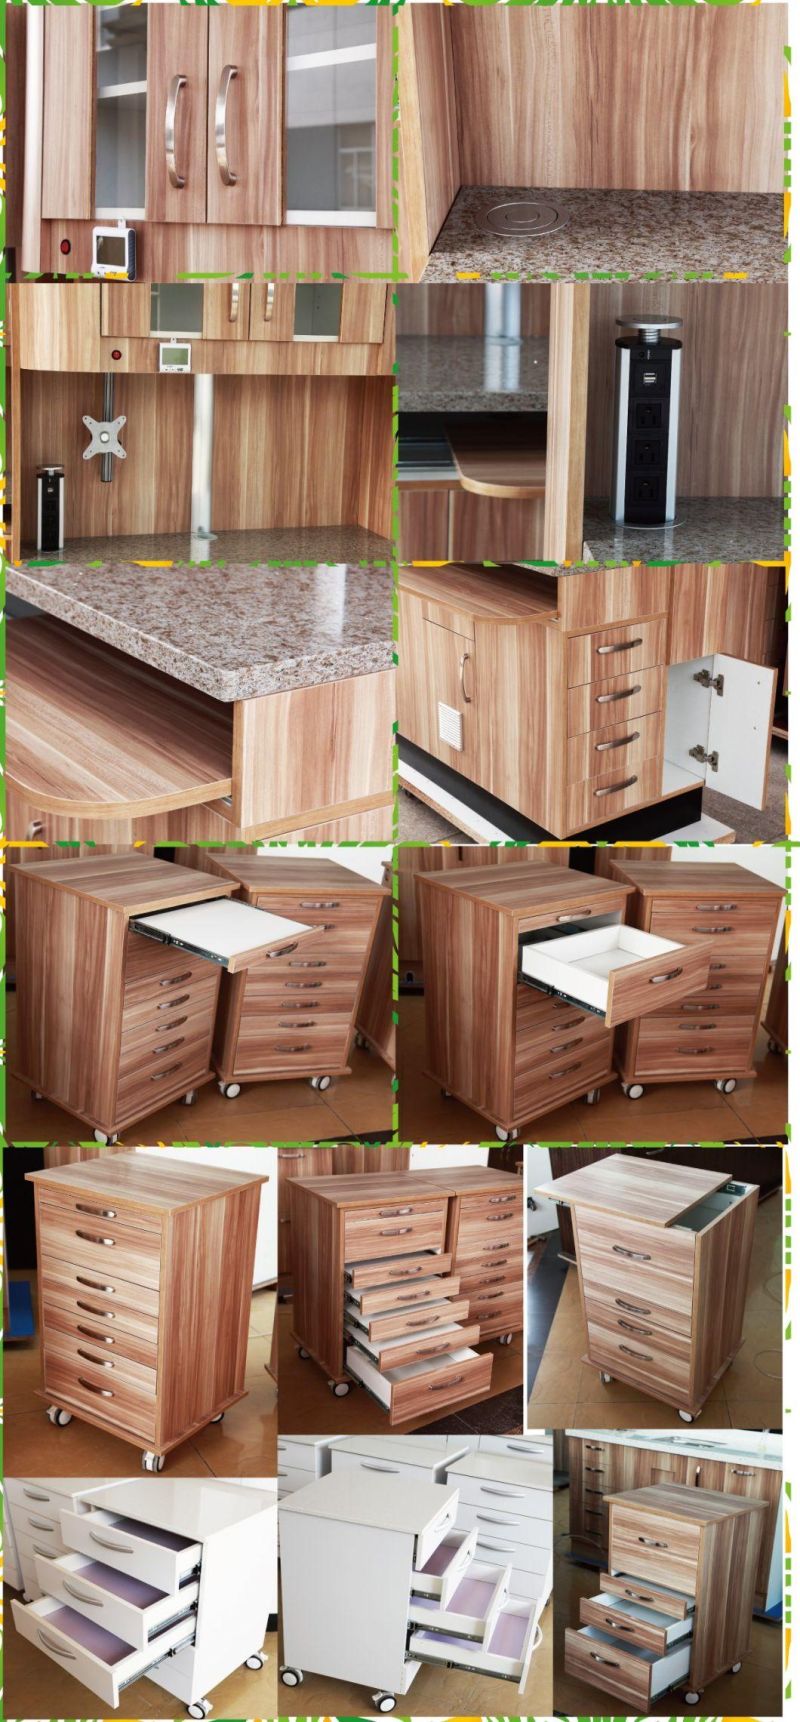 Medical Hospital Custom Trolley Dental Office Lab Laboratory Cabinet Furniture for Clinic with Sink for Sale